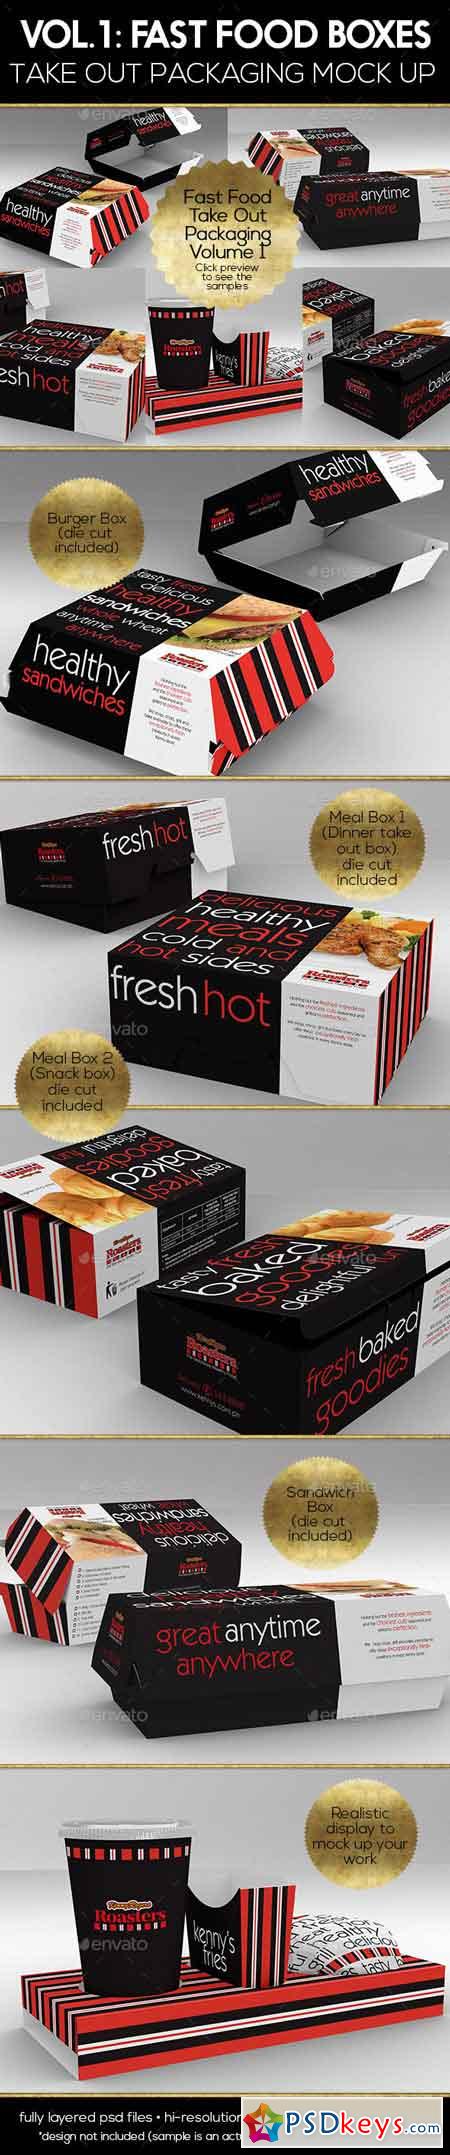 Fast Food Boxes Vol.1 Take Out Packaging Mock Ups 17655156